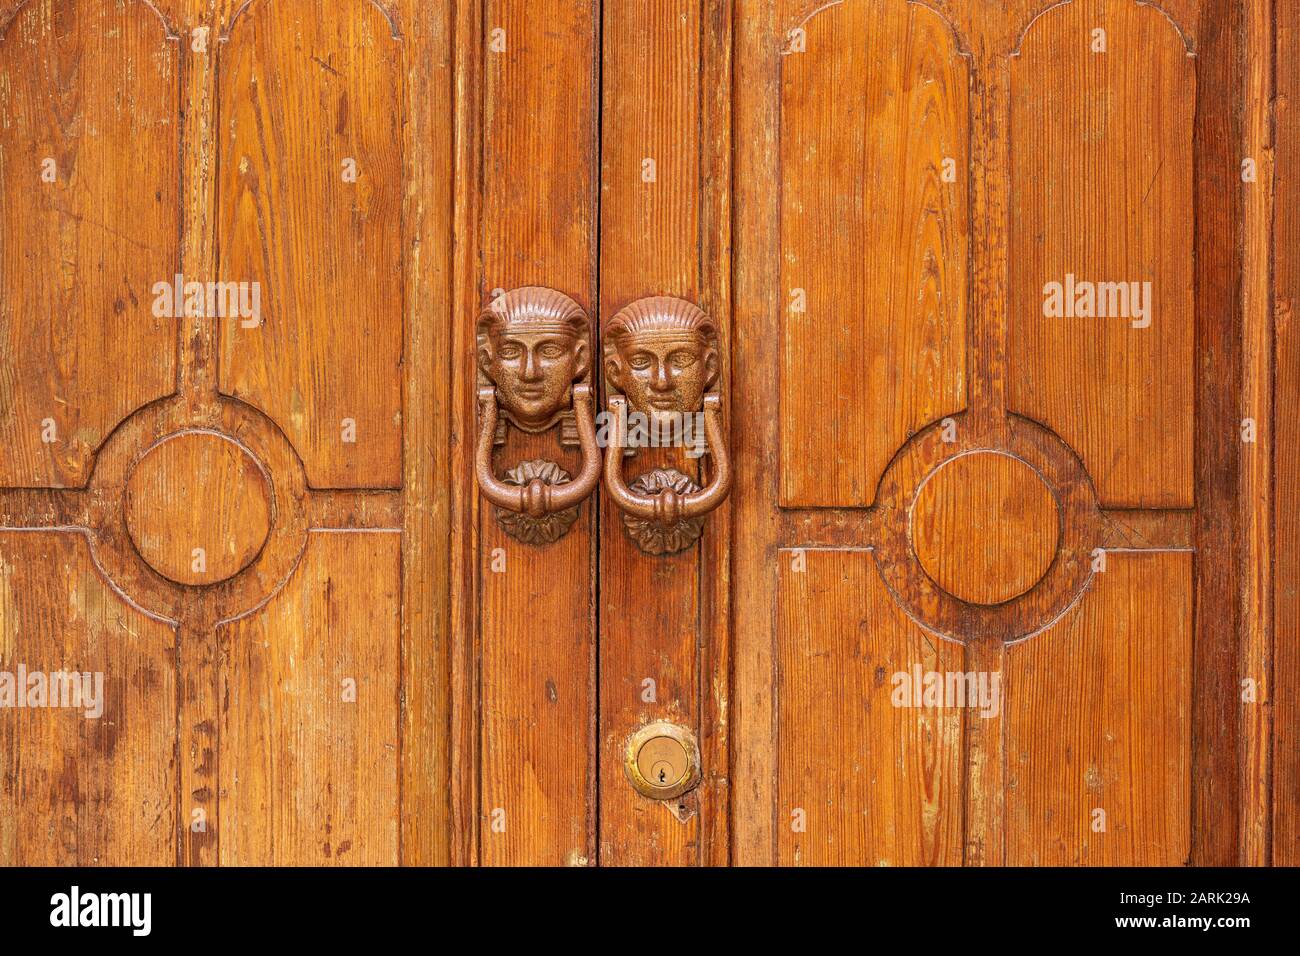 Italy, Sicily, Messina Province, Caronia. Egyptian styled knockers on wooden doors in the medieval hilltop town of Caronia. Stock Photo